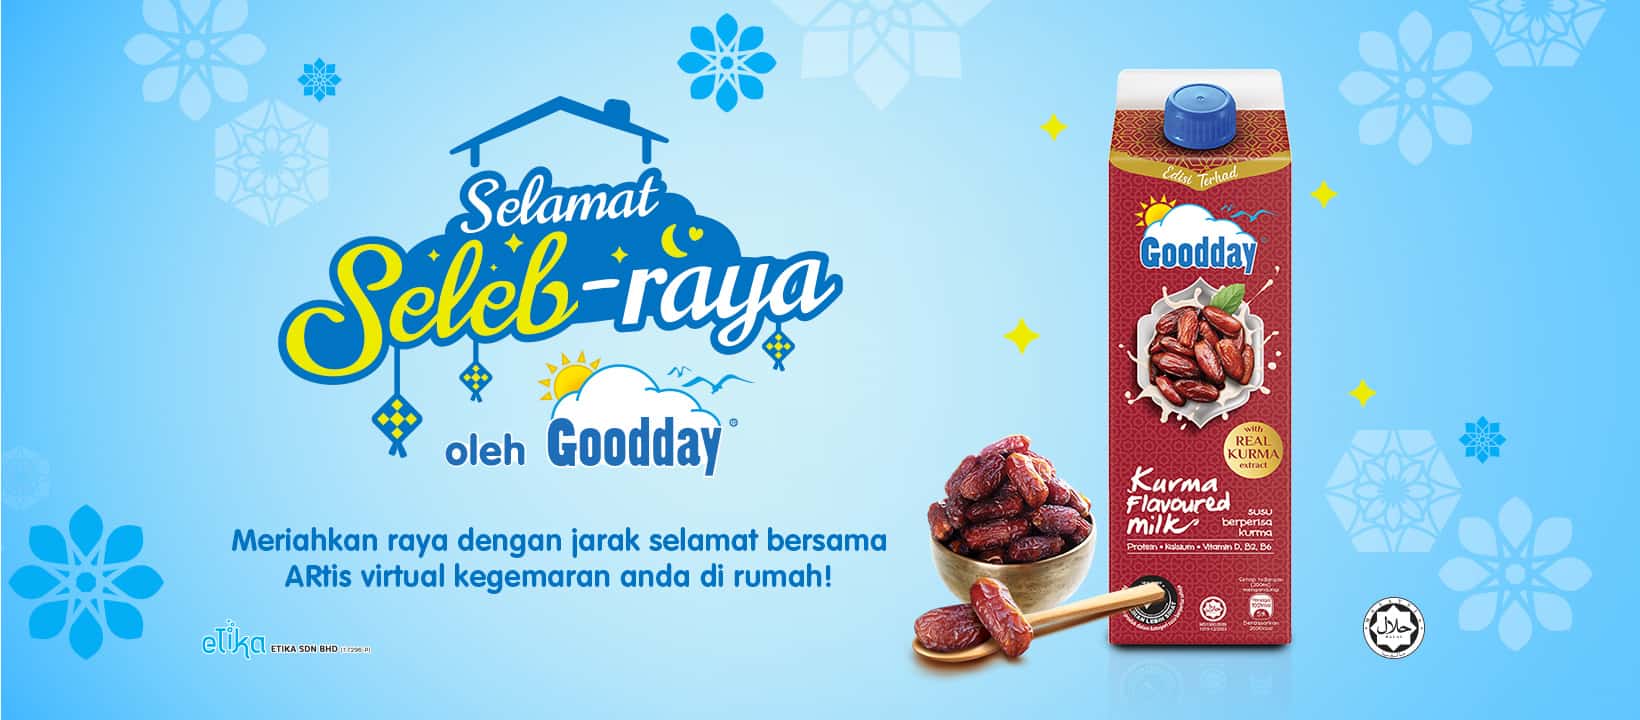 You are currently viewing Goodday Milk leverages technology for goodness filled Raya celebrations